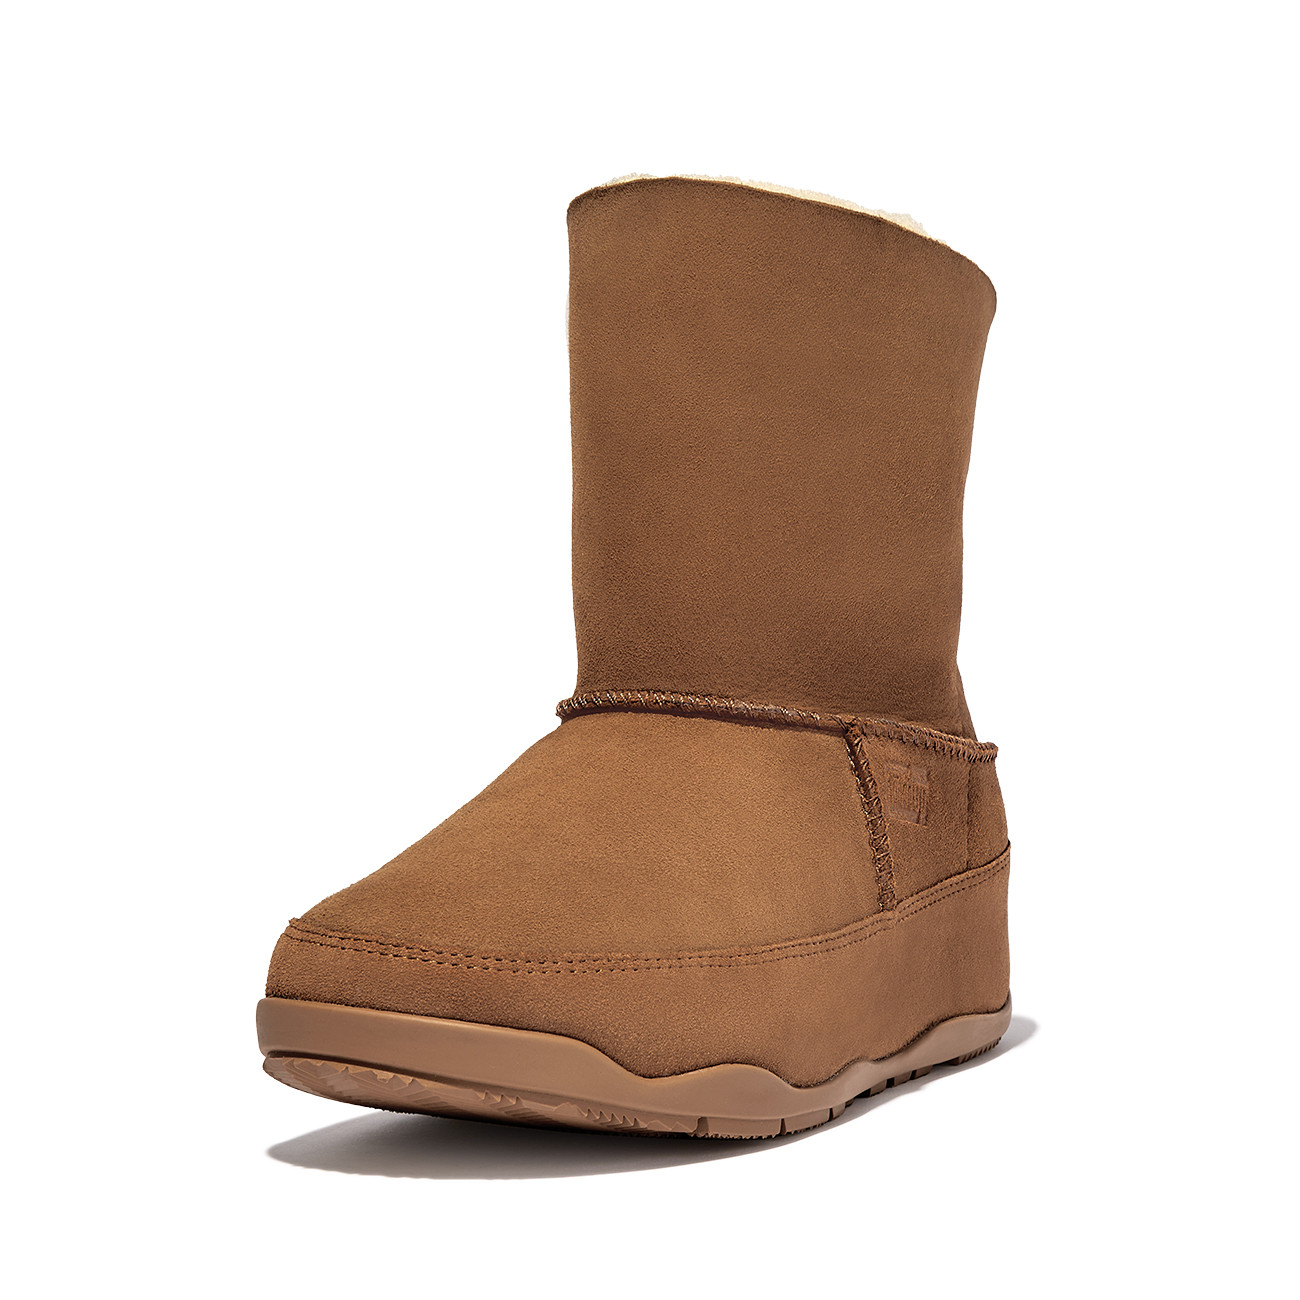 Afbeelding van FitFlop Original mukluk shorty double-face shearling boots